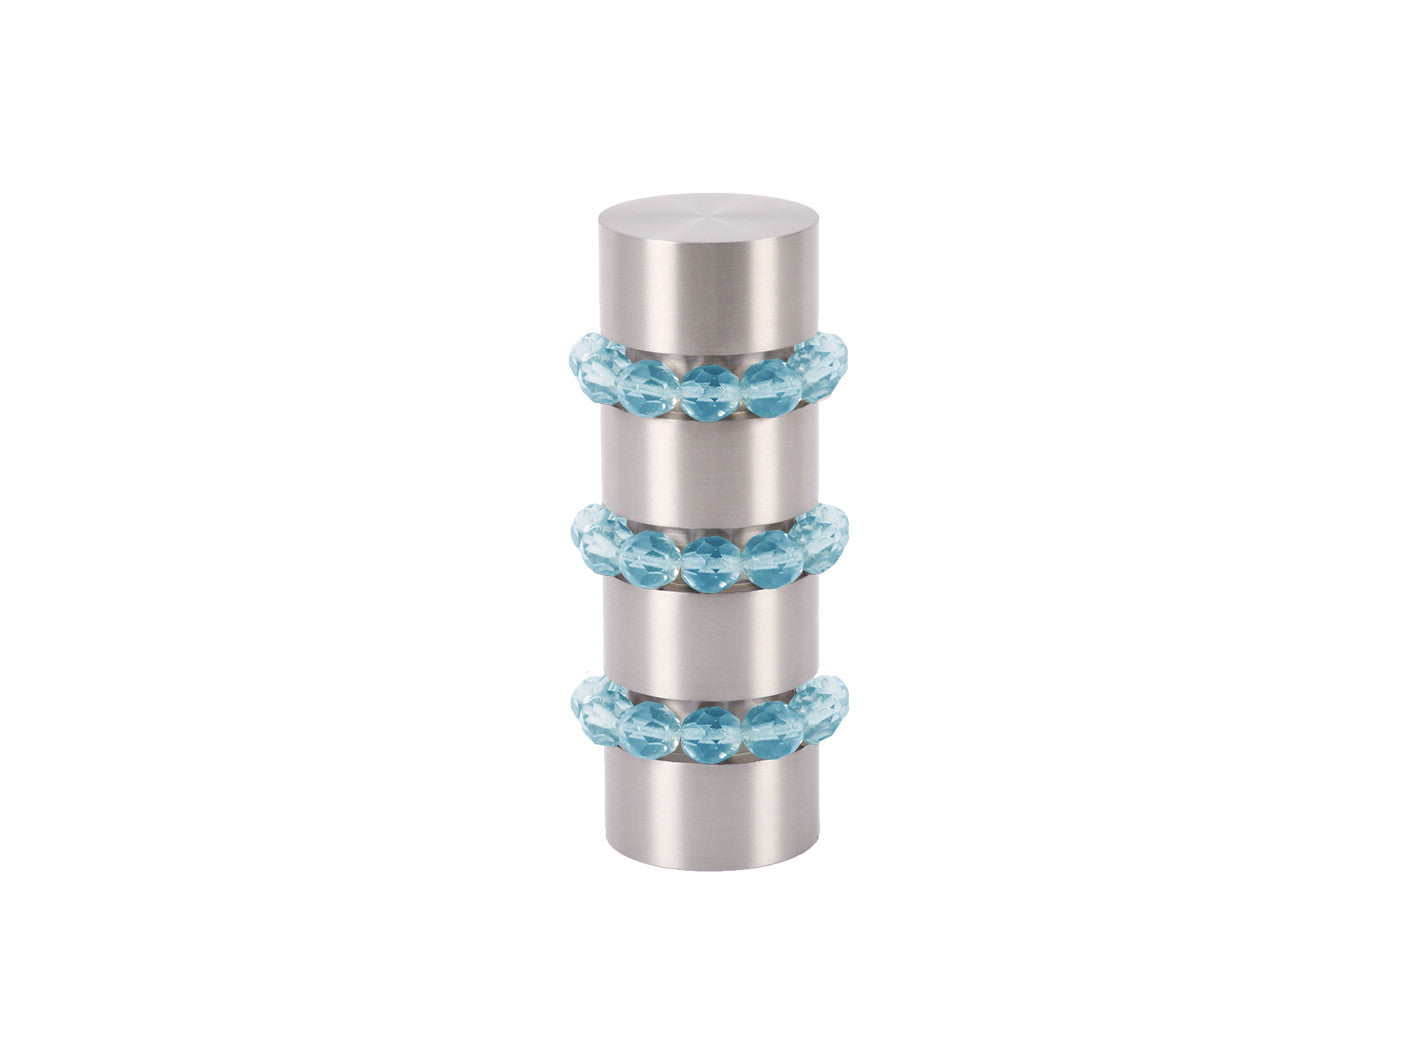 Beaded stainless steel curtain pole finial in turquoise blue glass | Walcot House 19mm collection